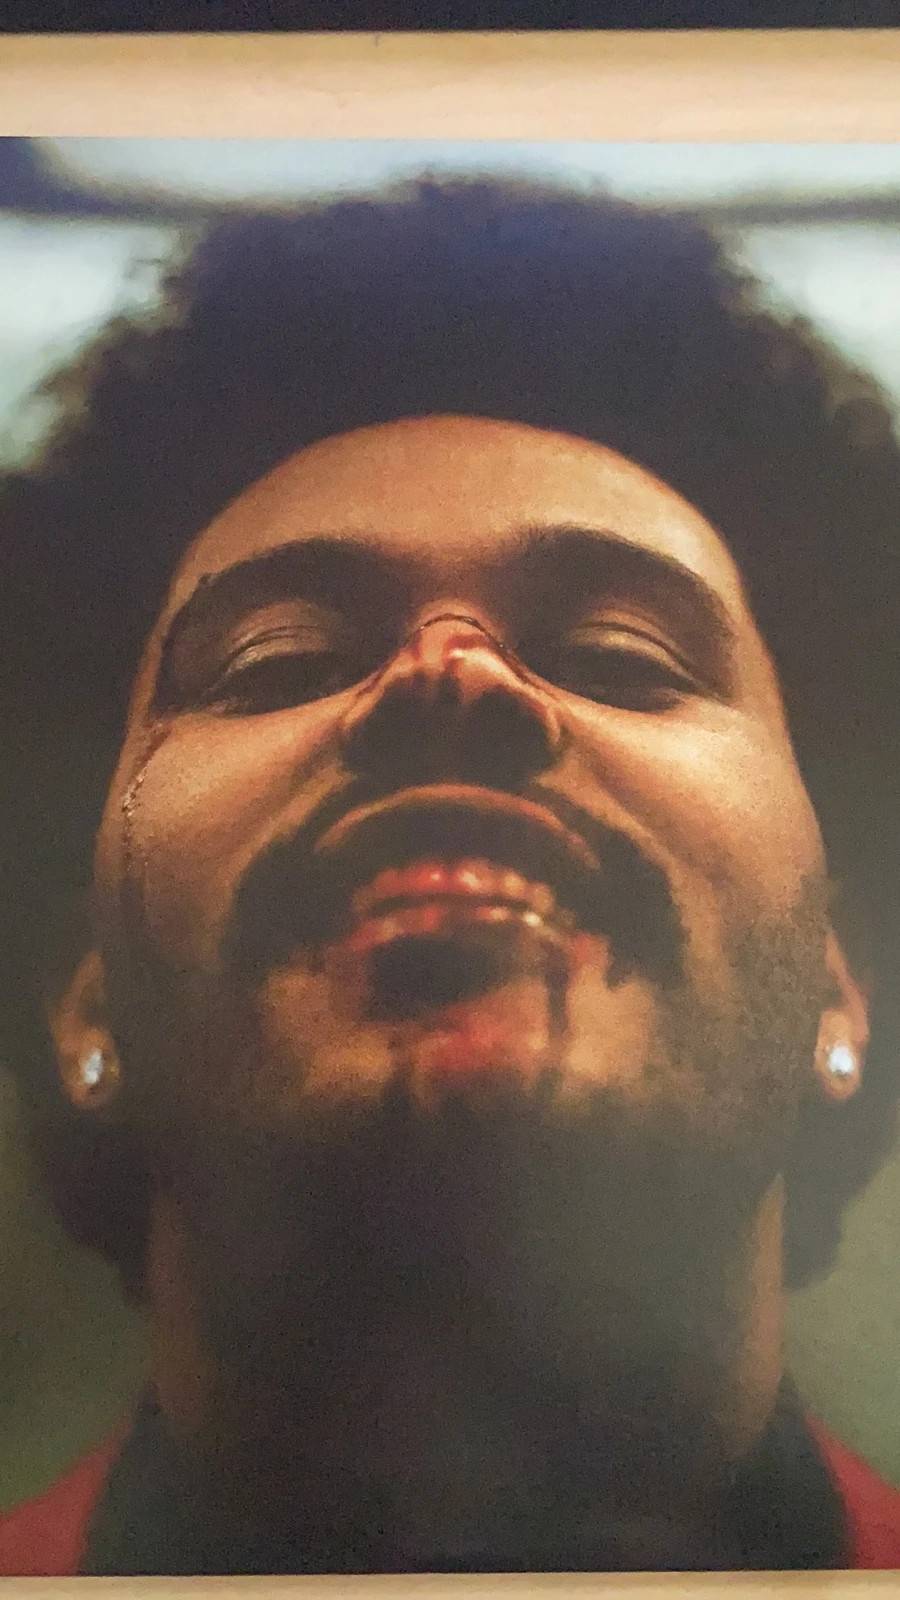 The Weeknd “After Hours” Doppio Vinile